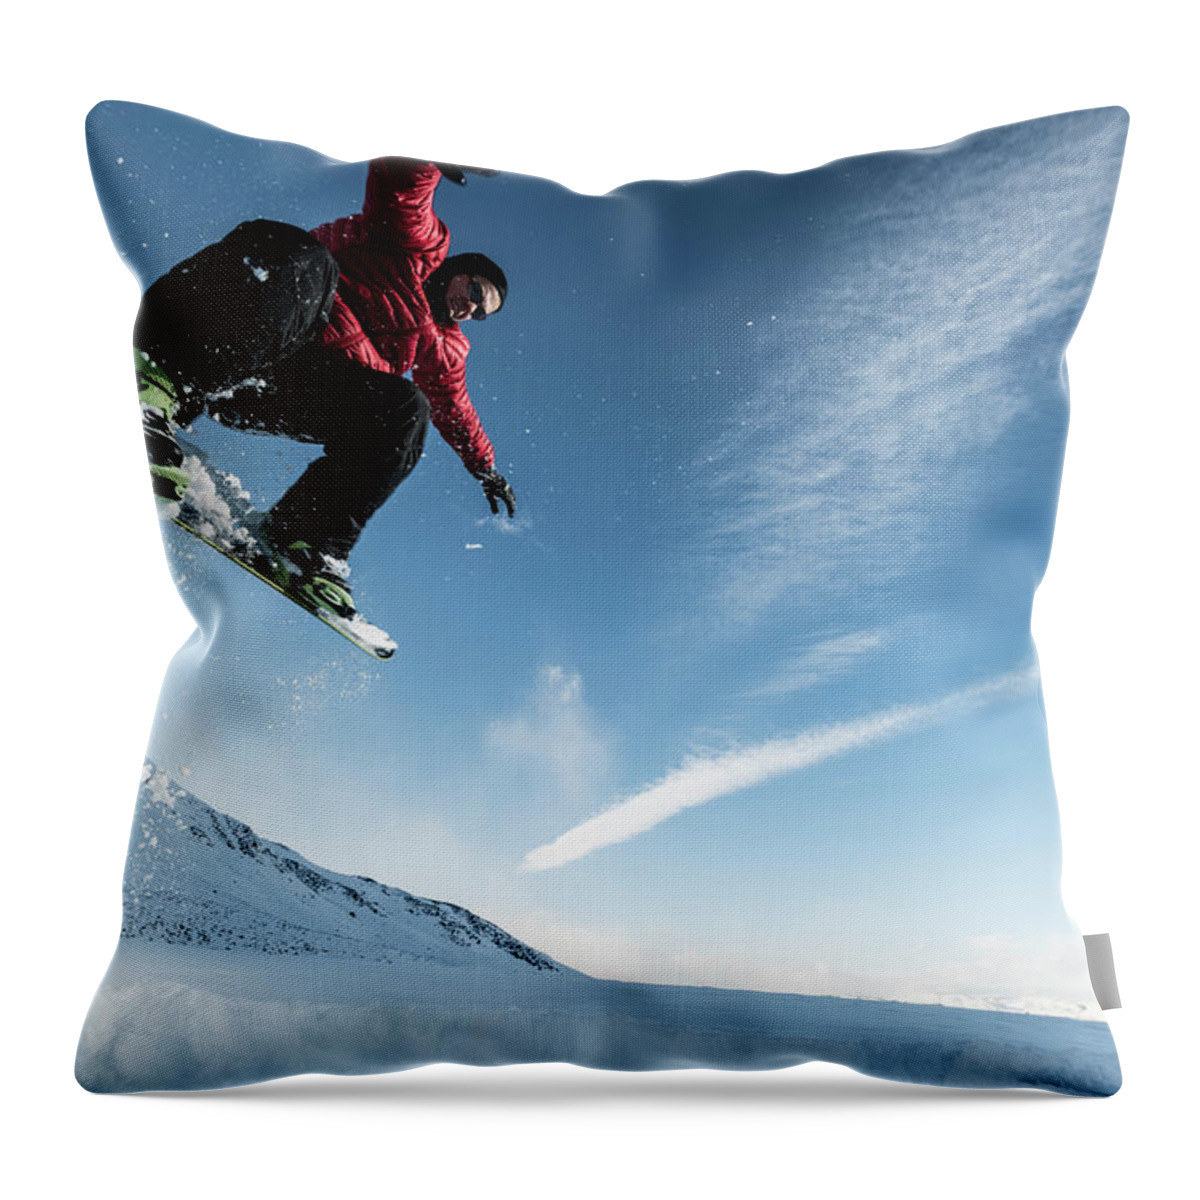 Extreme Terrain Throw Pillow featuring the photograph Snowboard by Vernonwiley